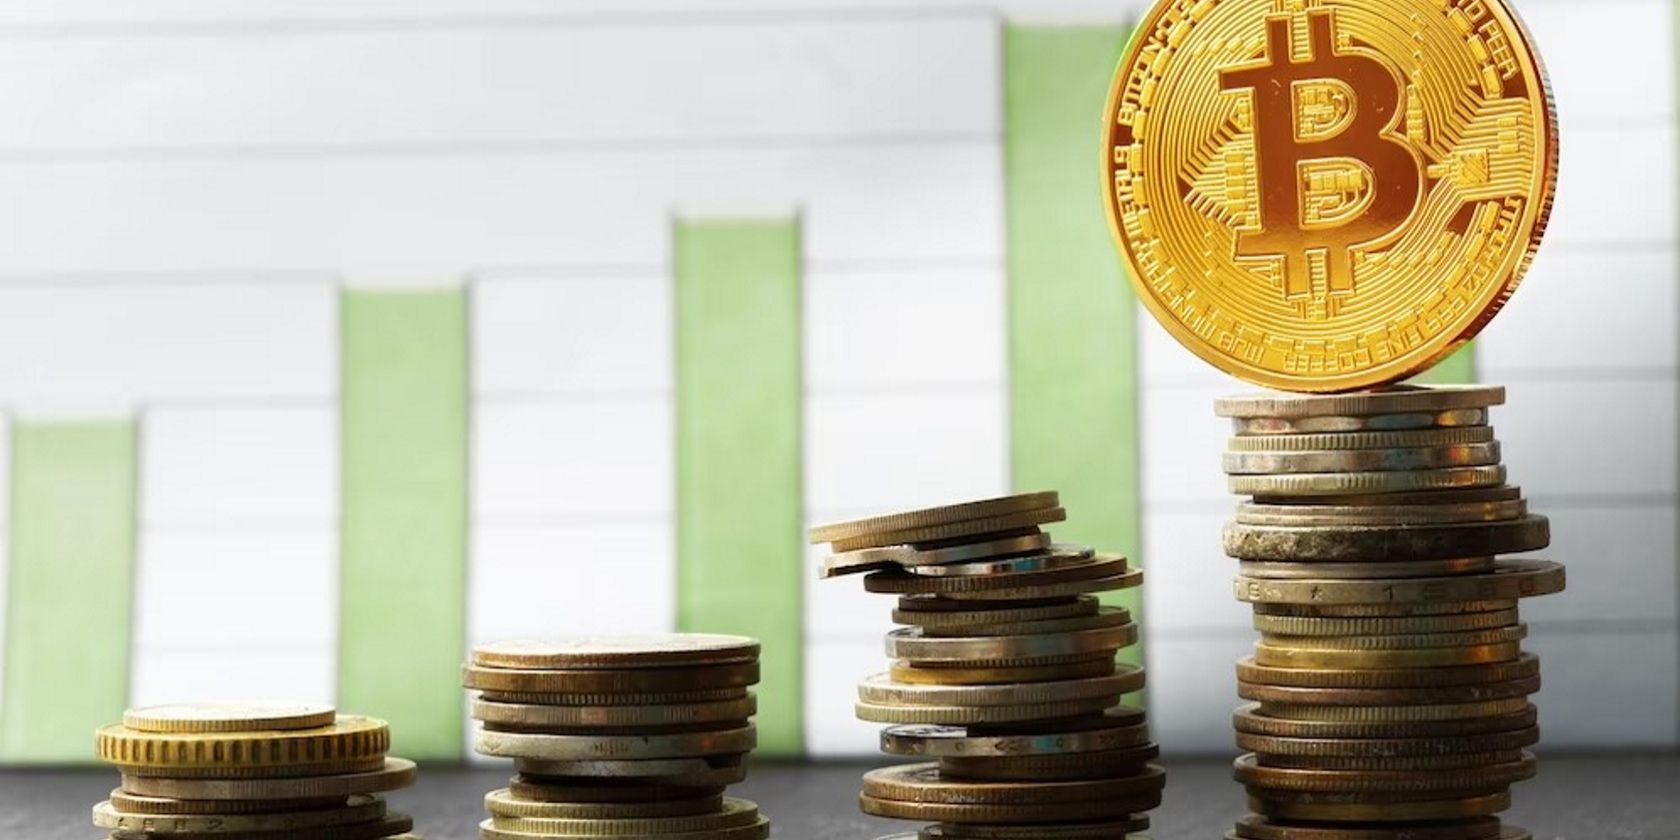 Bitcoin and cryptocurrencies stacked in four piles